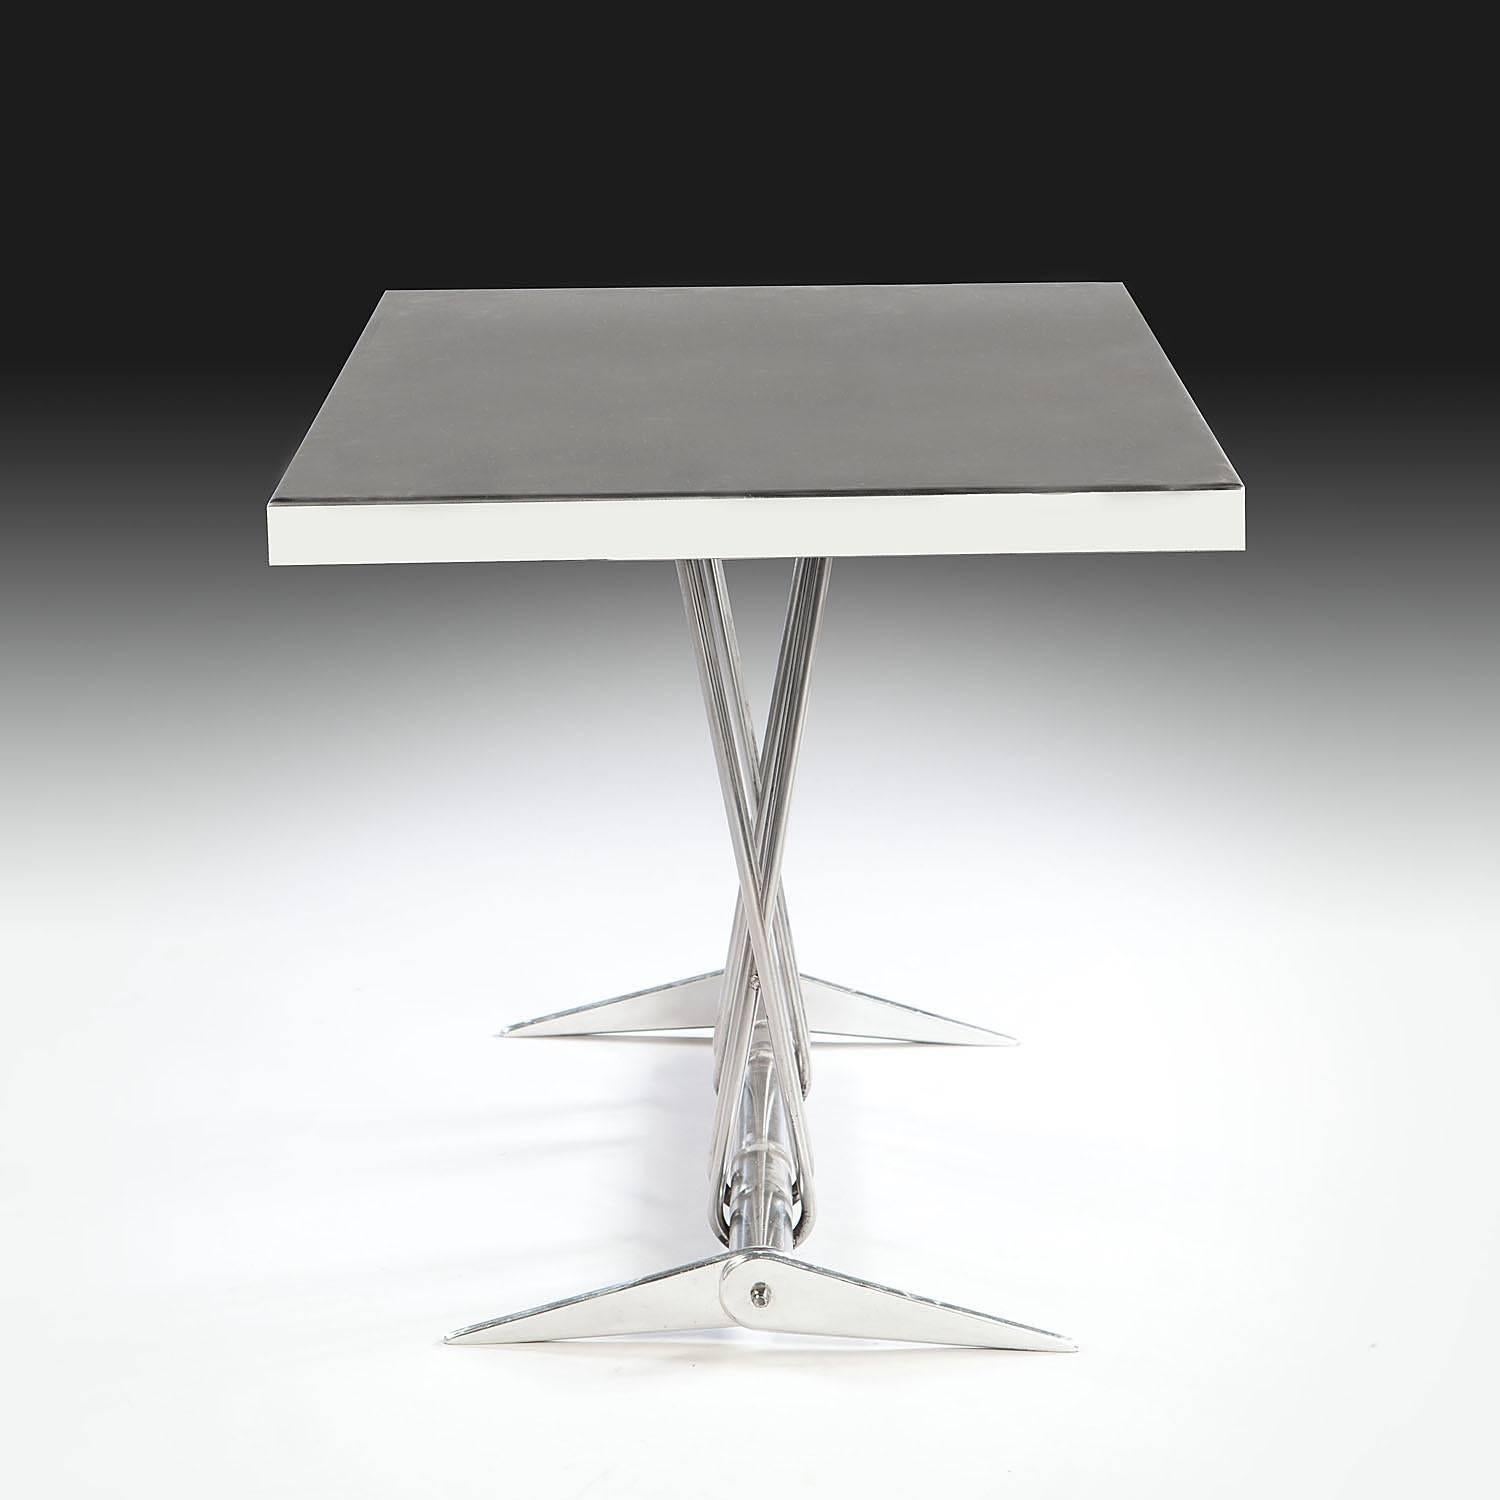 France, circa 1950.

A polished steel rectangular center table on column supports with splayed bracket feet. In the manner of Jean Prouvé.

Measures: Height 30 ins (76 cm).
Width 41 ins (114 cm).
Depth 23 ins (58 cm).